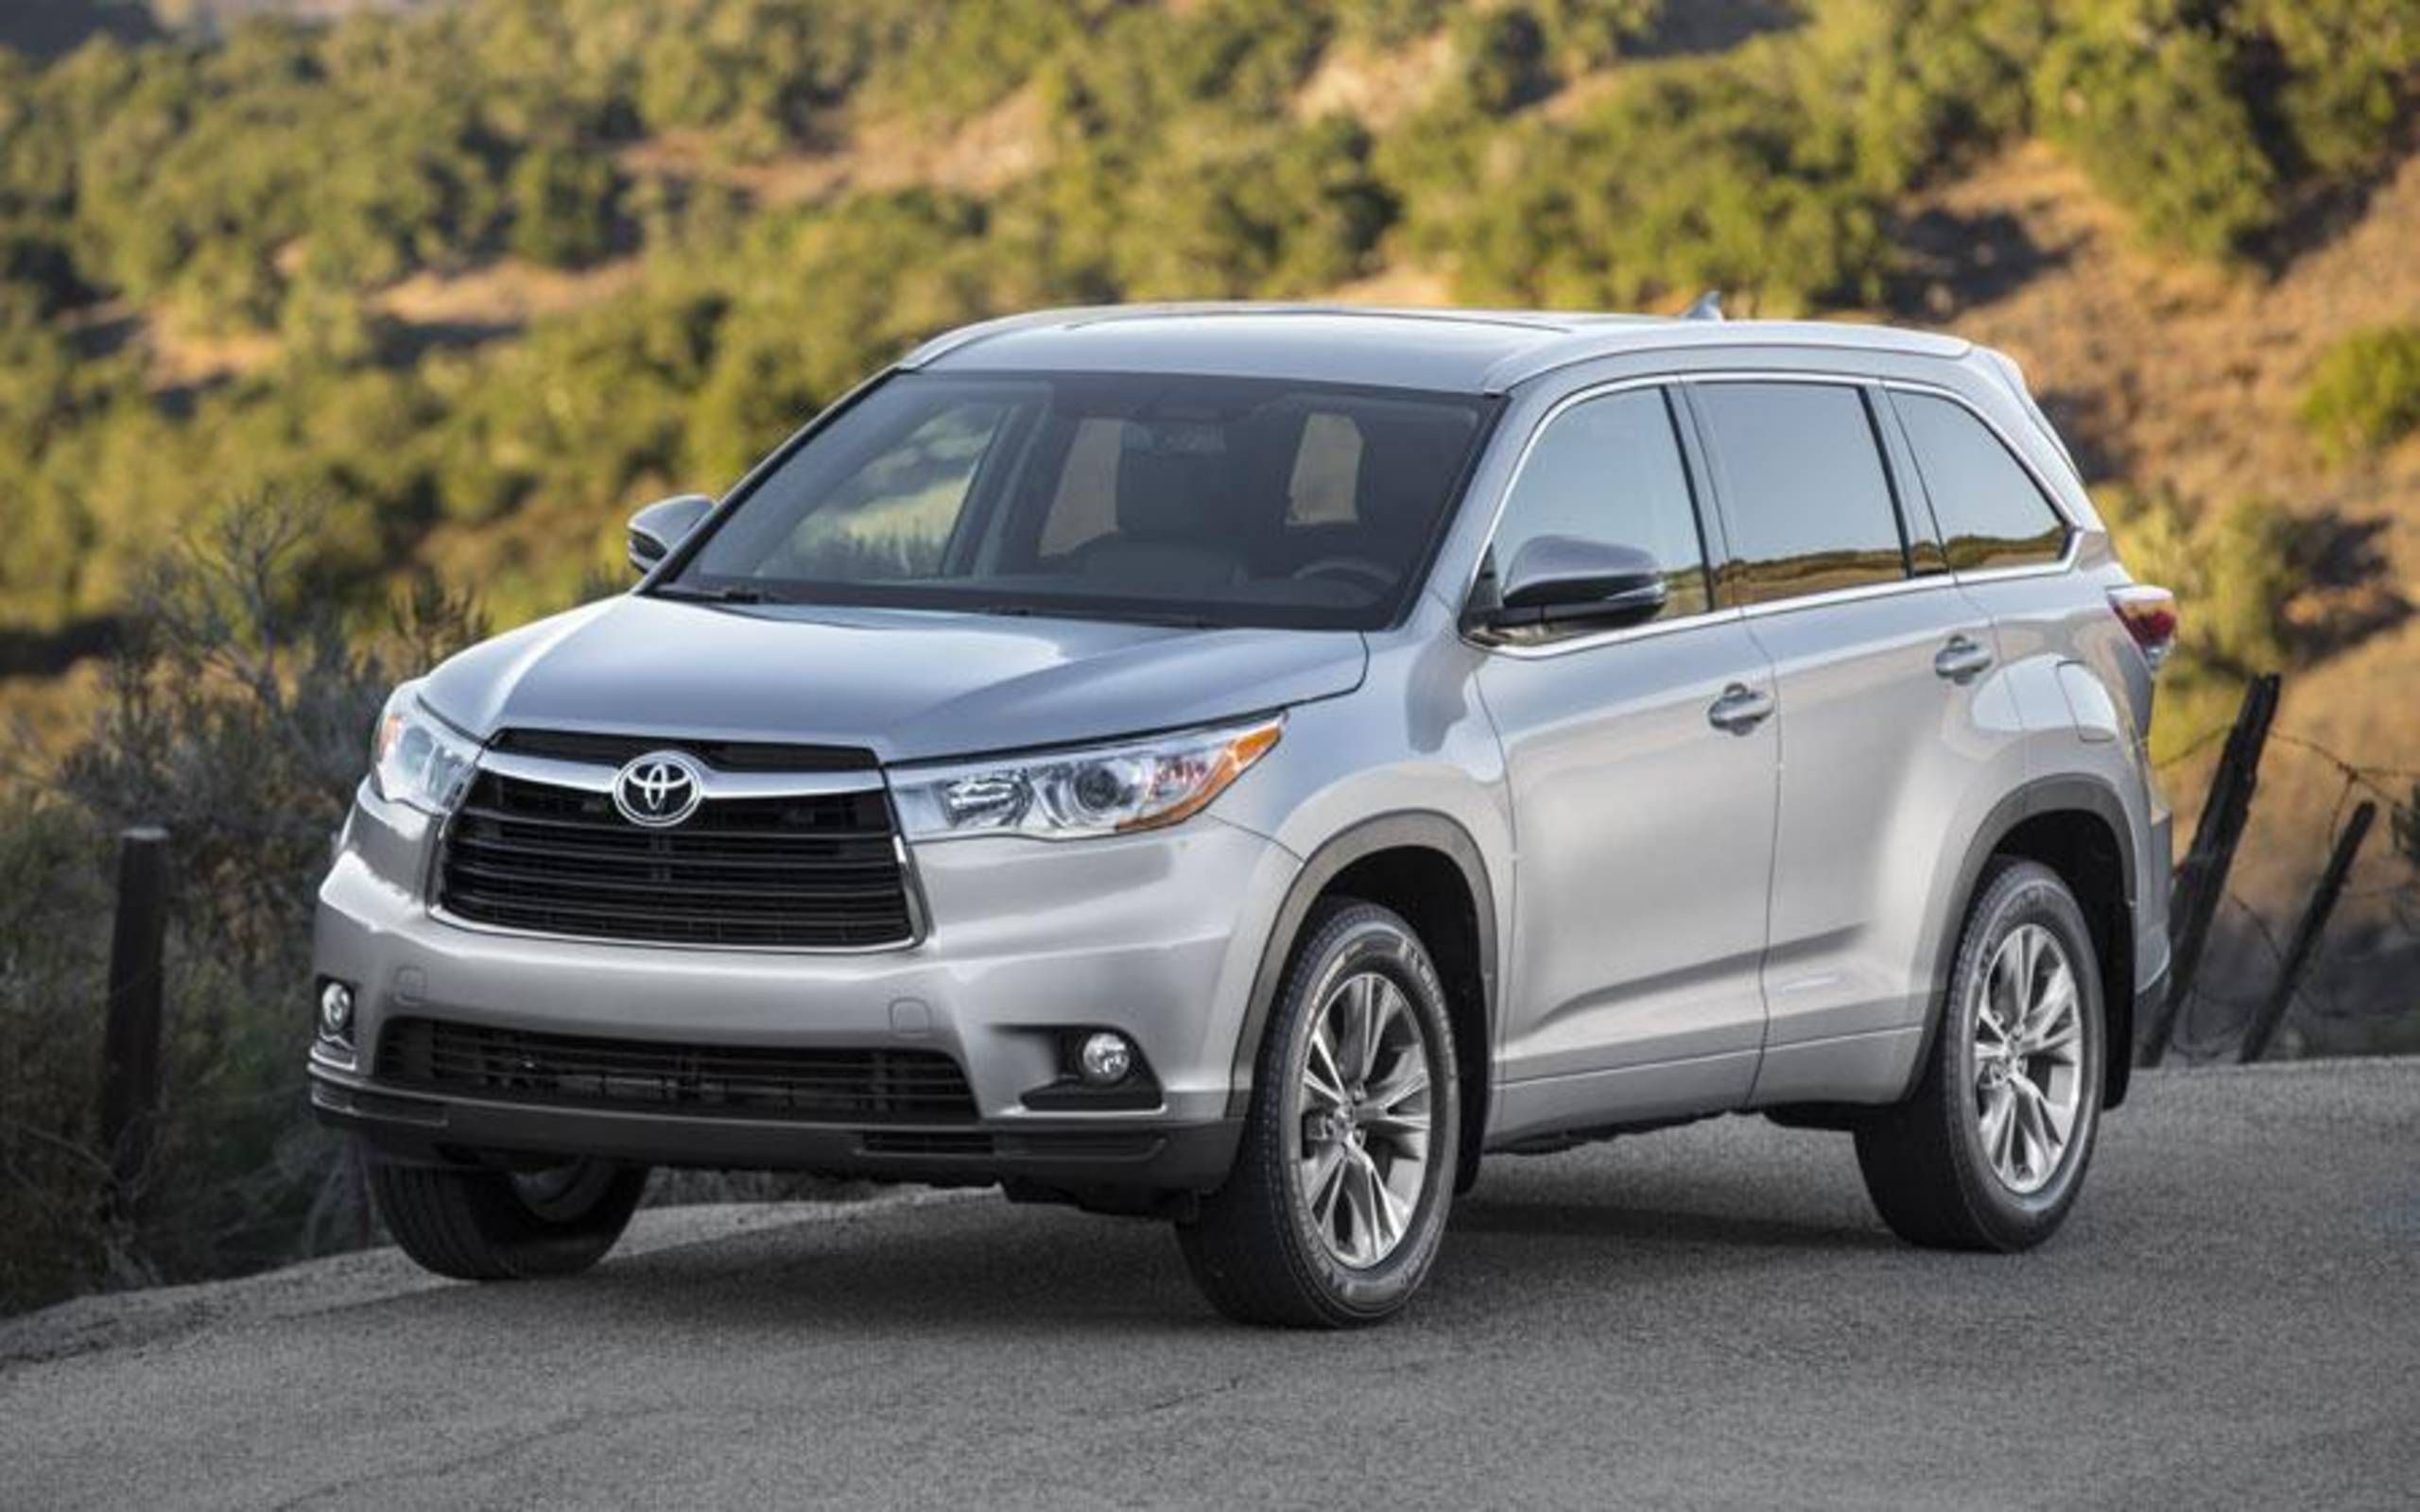 2014 Toyota Highlander Reviews Ratings Prices  Consumer Reports